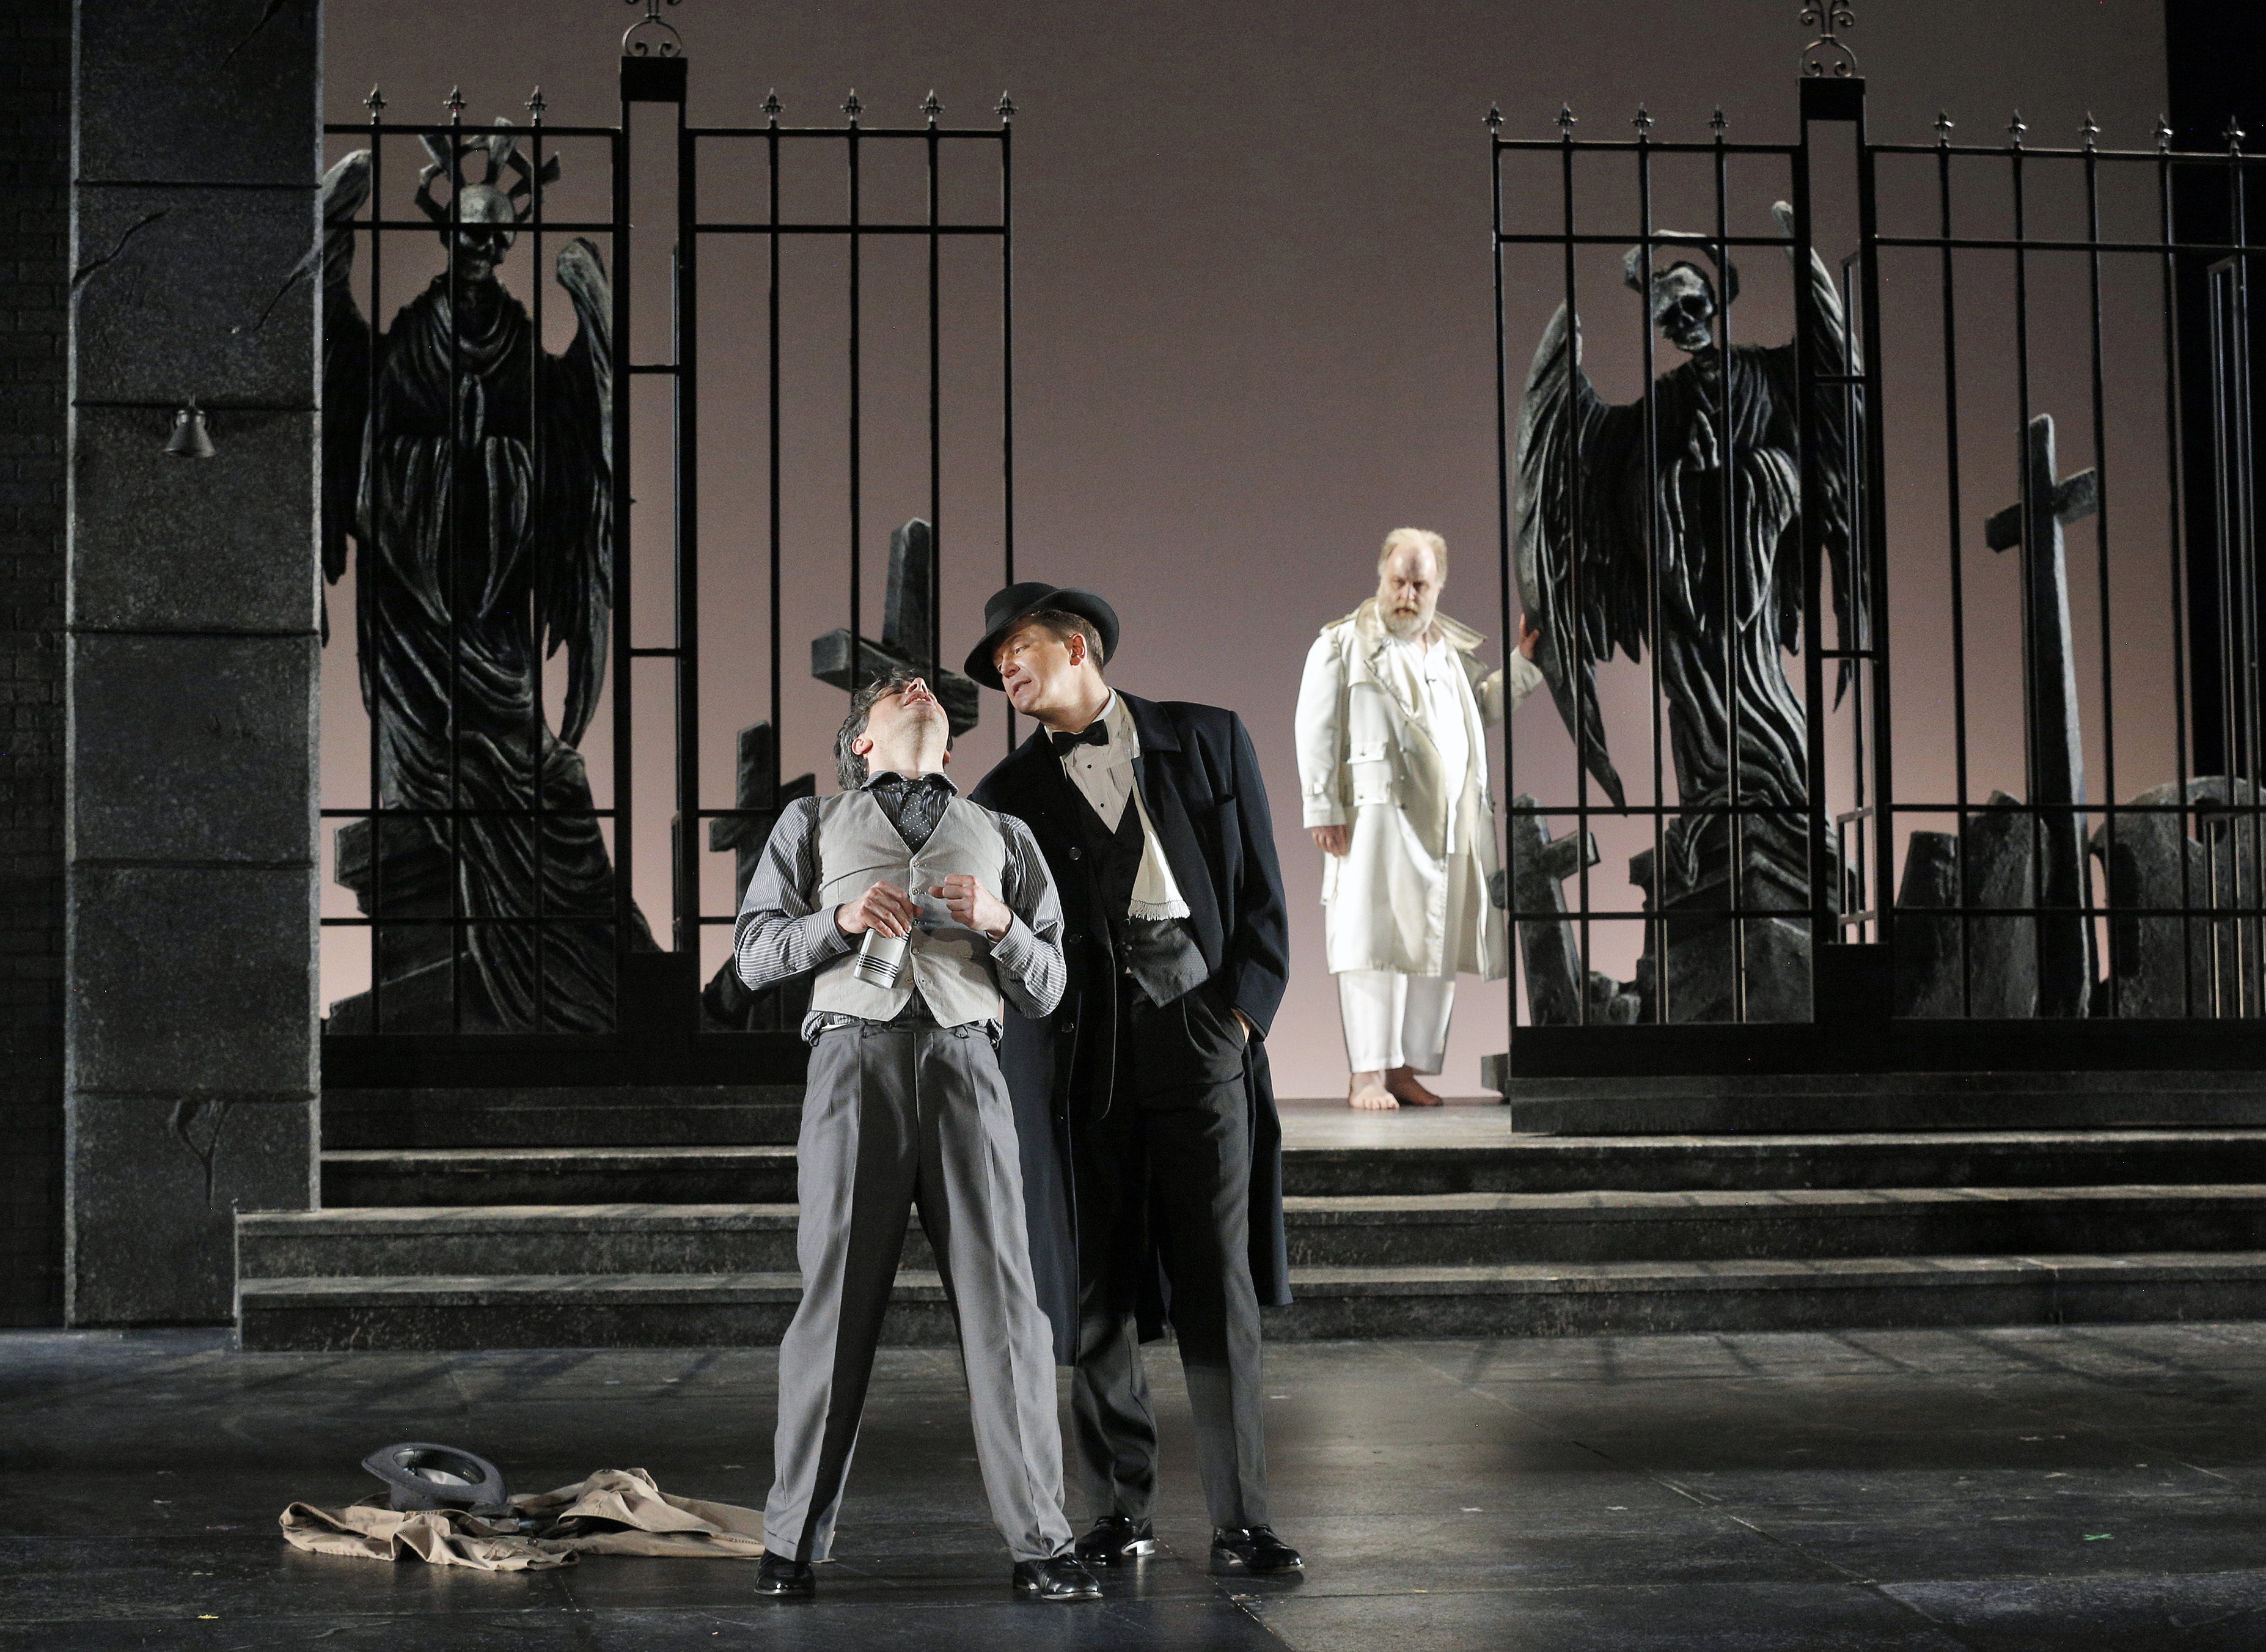 In Pittsburgh Opera's 'Don Giovanni,' the night is alive but someone soon will not be. (photo: Cory Weaver for Lyric Opera of Kansas City. The production is being re-staged here with a new cast.)